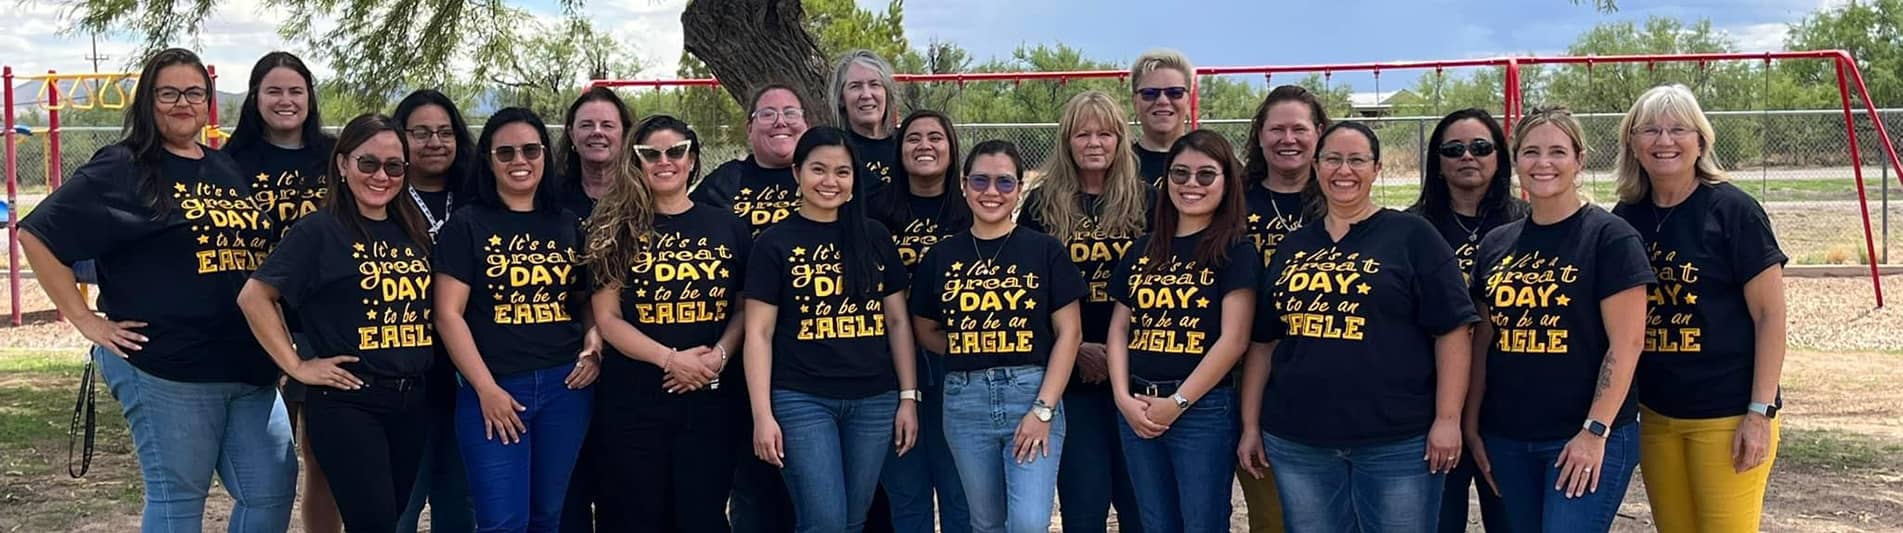 2021-2022 Altar Valley Teachers and Staff